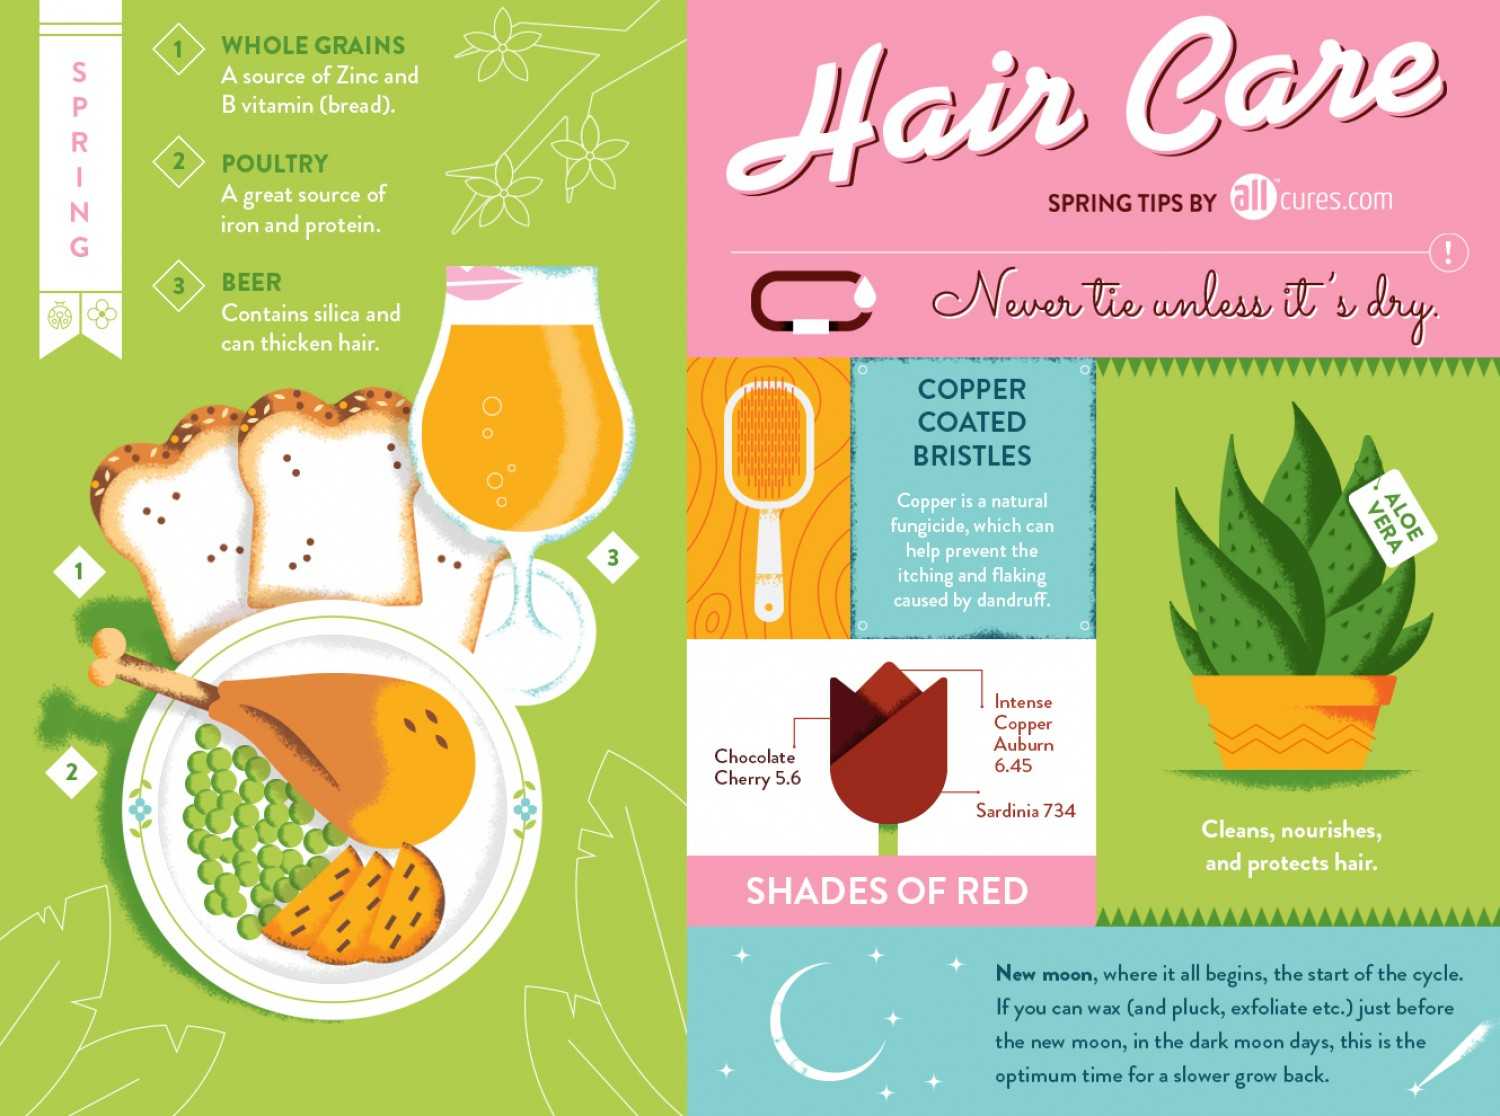 Hair Care Tips For Spring